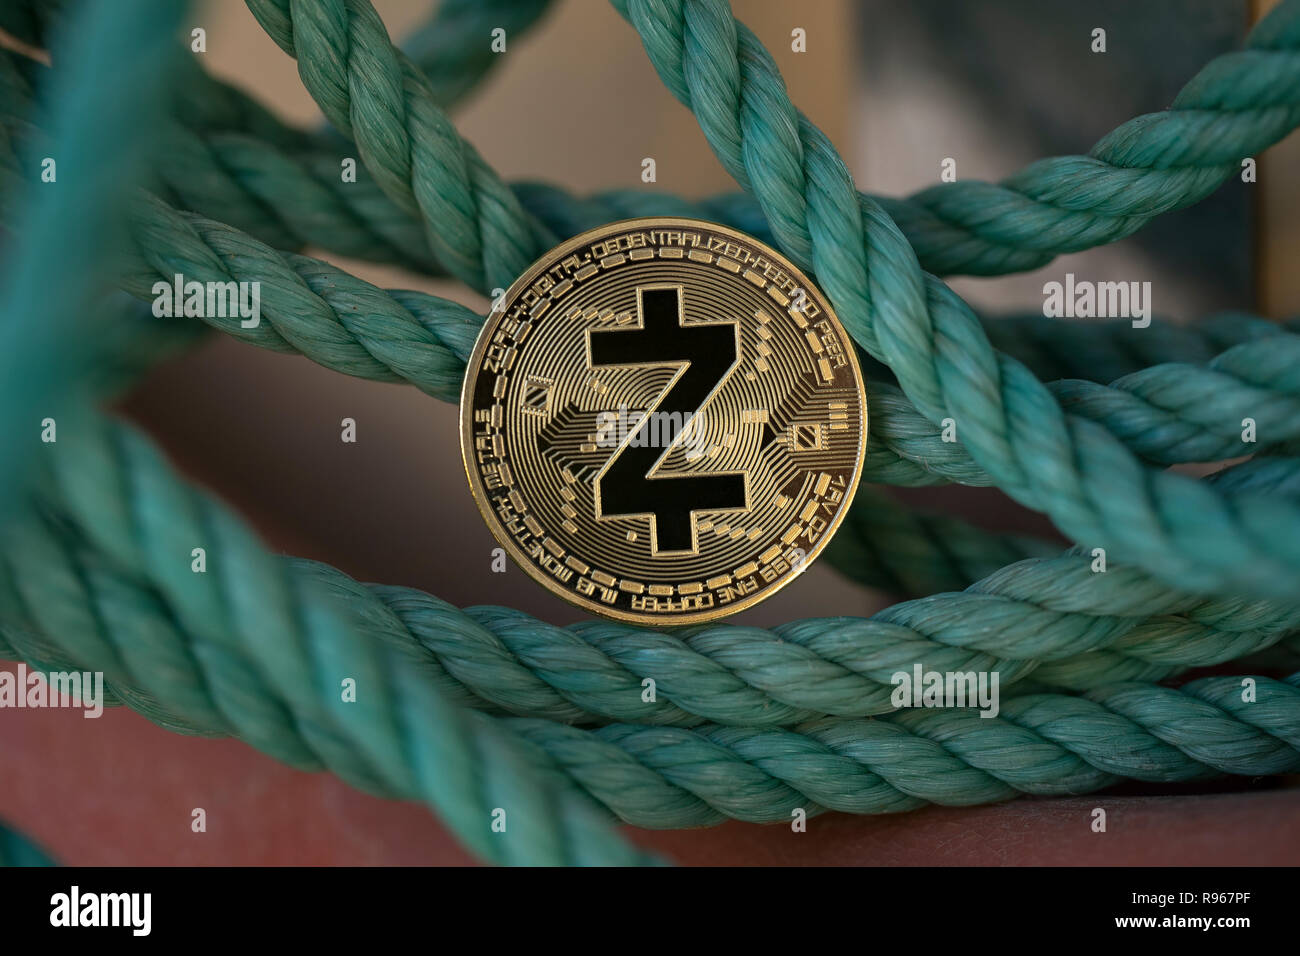 Z-Cash cryptocurrency physical coin placed between the green ropes Stock Photo